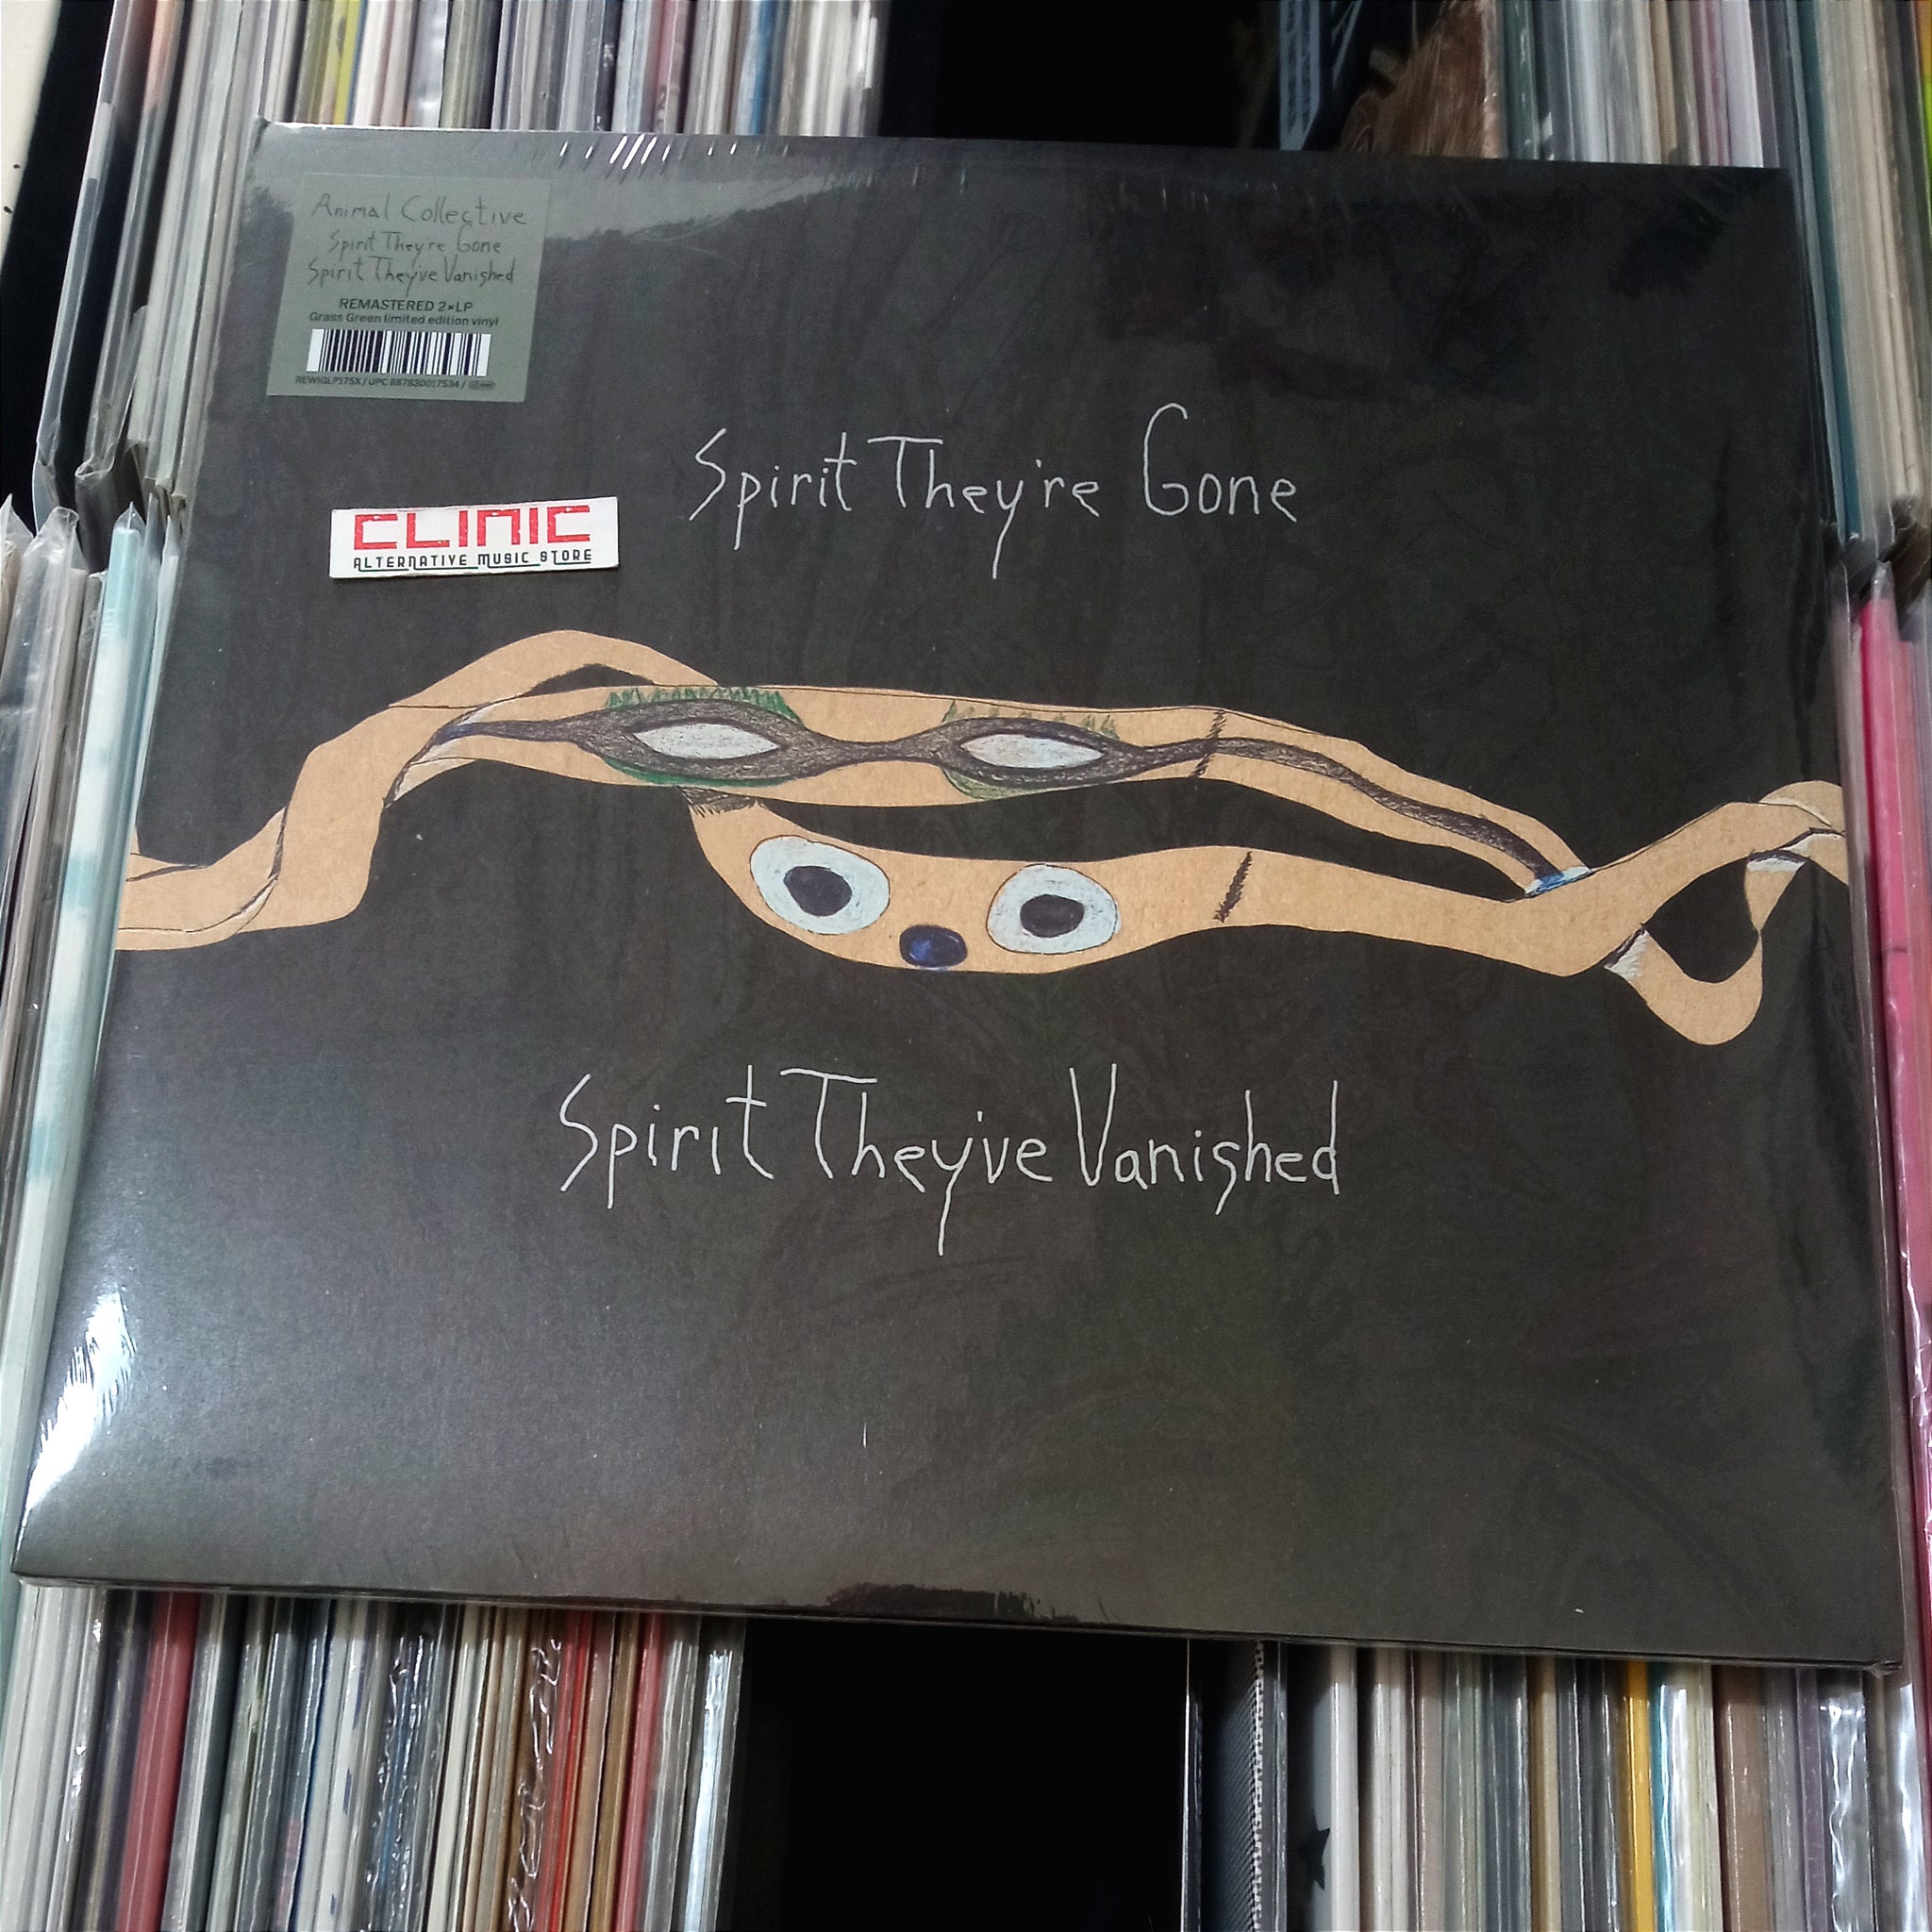 LP - ANIMAL COLLECTIVE - SPIRIT THEY'RE GONE, SPIRIT THEY'VE VANISHED (Indie Exclusive)